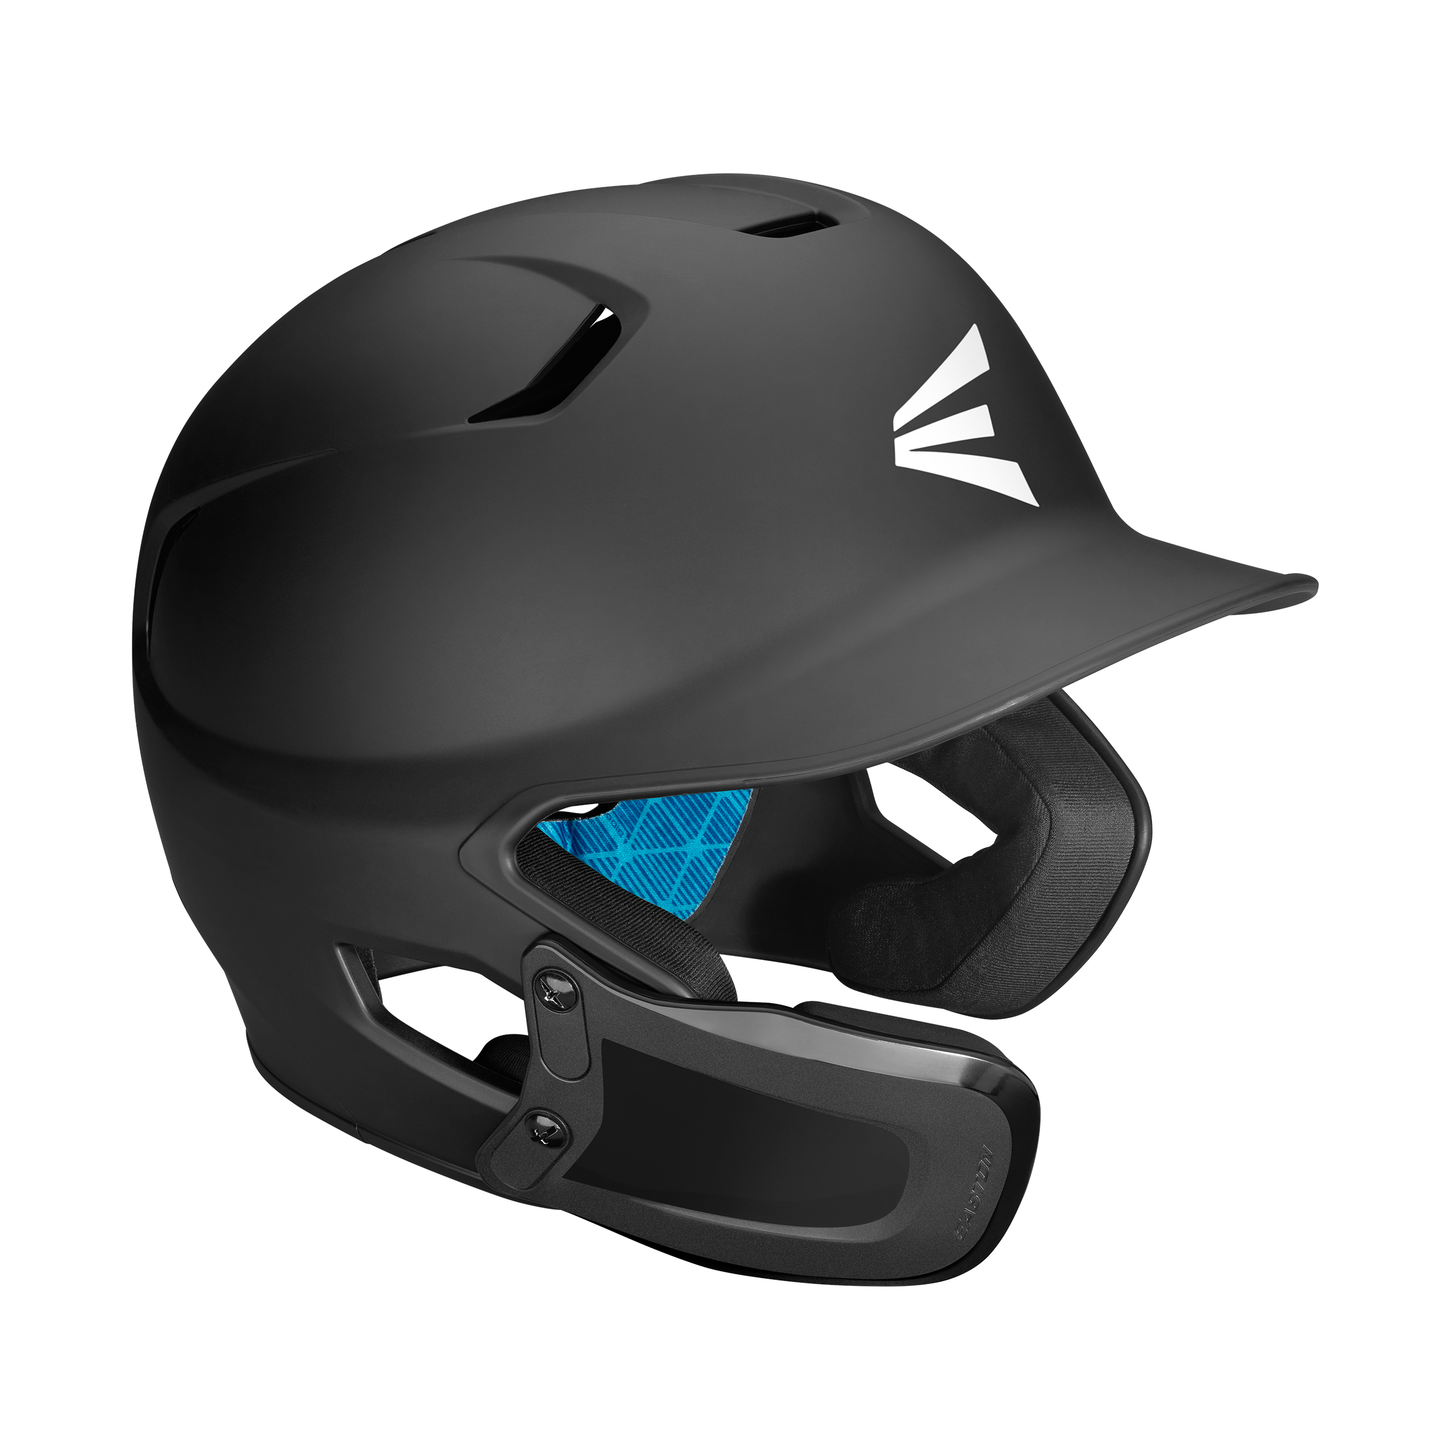 Easton Z5 Matte Solid Baseball Helmet with Universal Jaw Guard